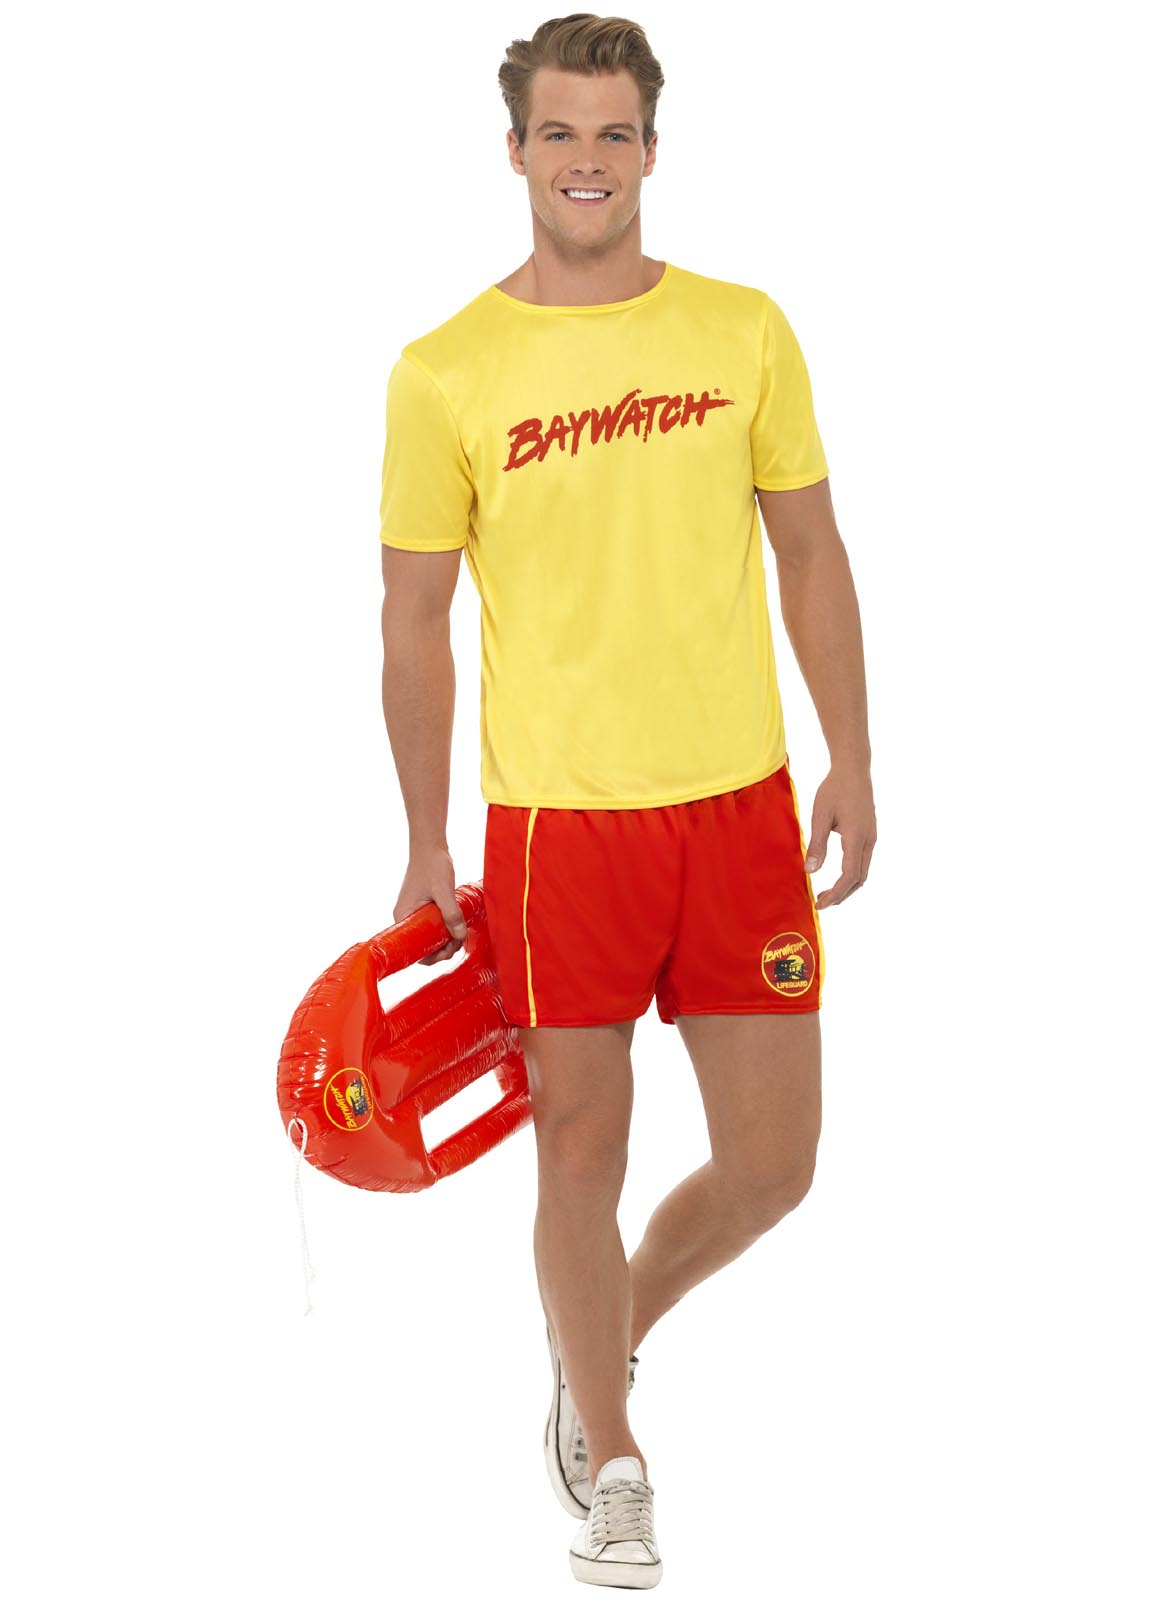 Baywatch Beach Lifeguard Costume Adult — Party Britain 